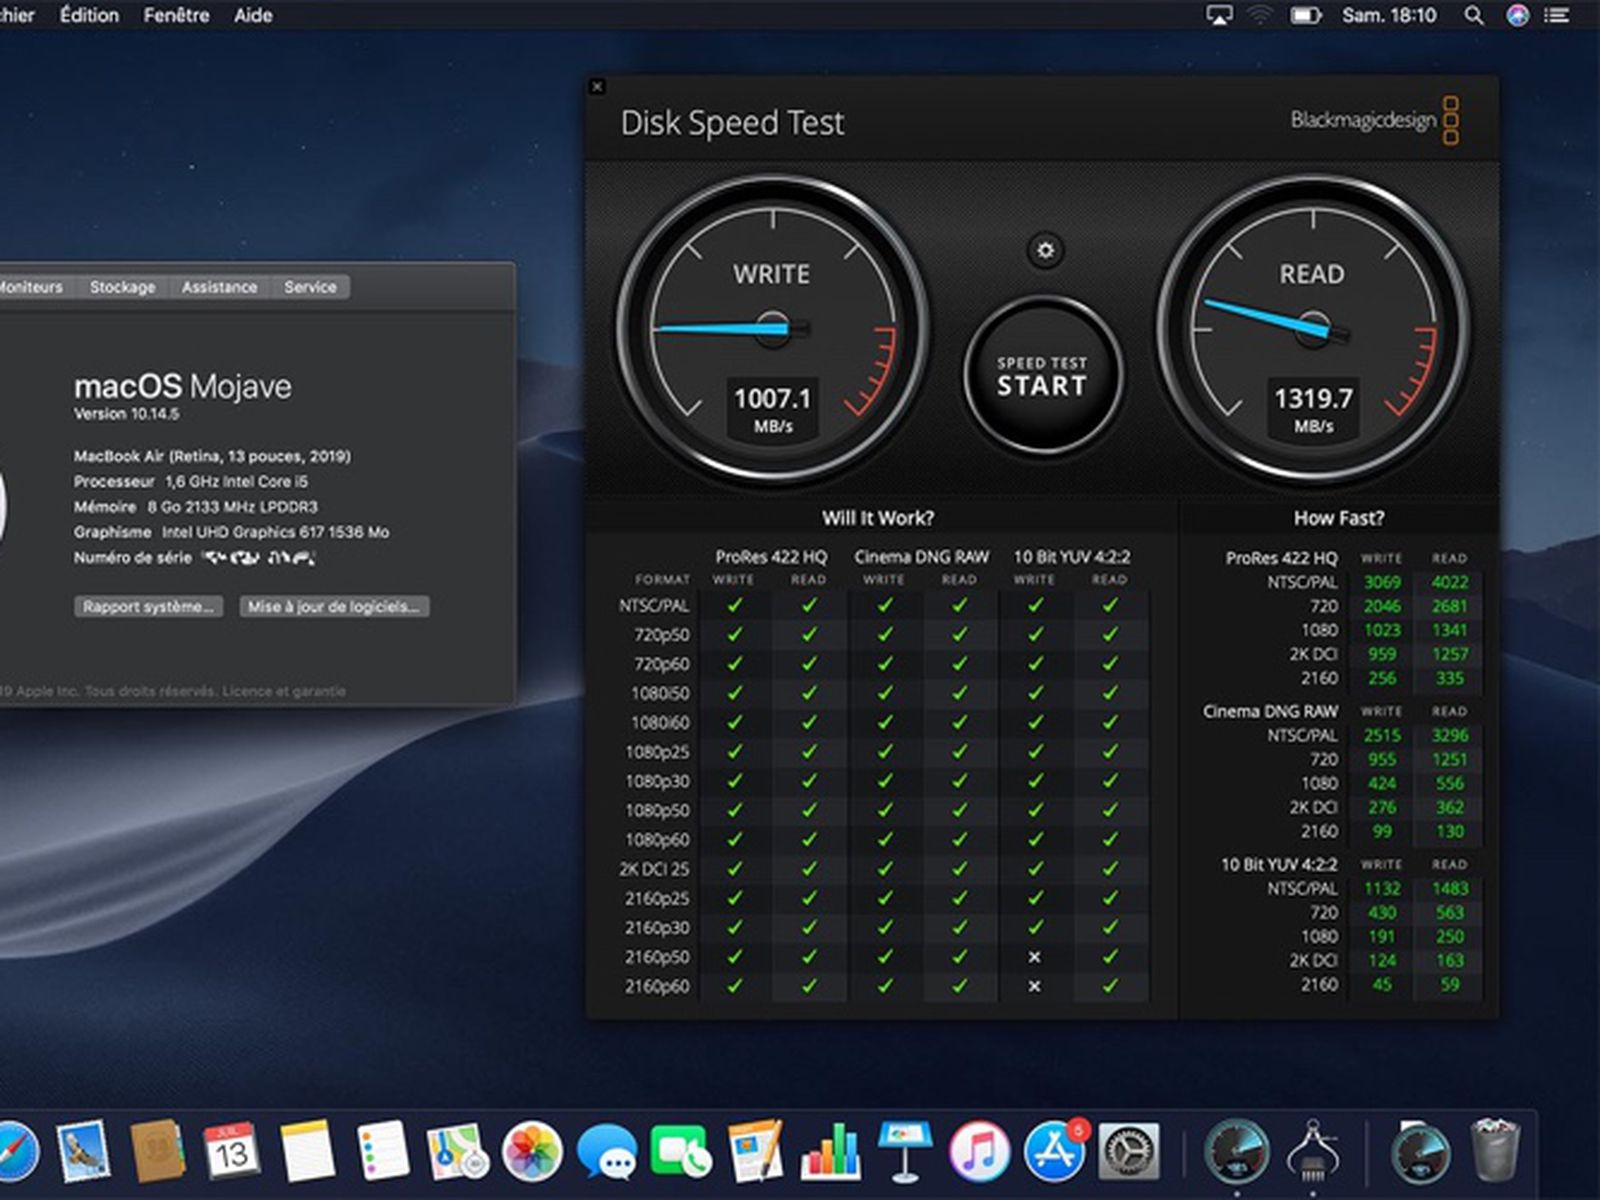 Joseph Banks Getting worse Transition Apple's 2019 256GB MacBook Air Includes Slower SSD Than 2018 Model -  MacRumors